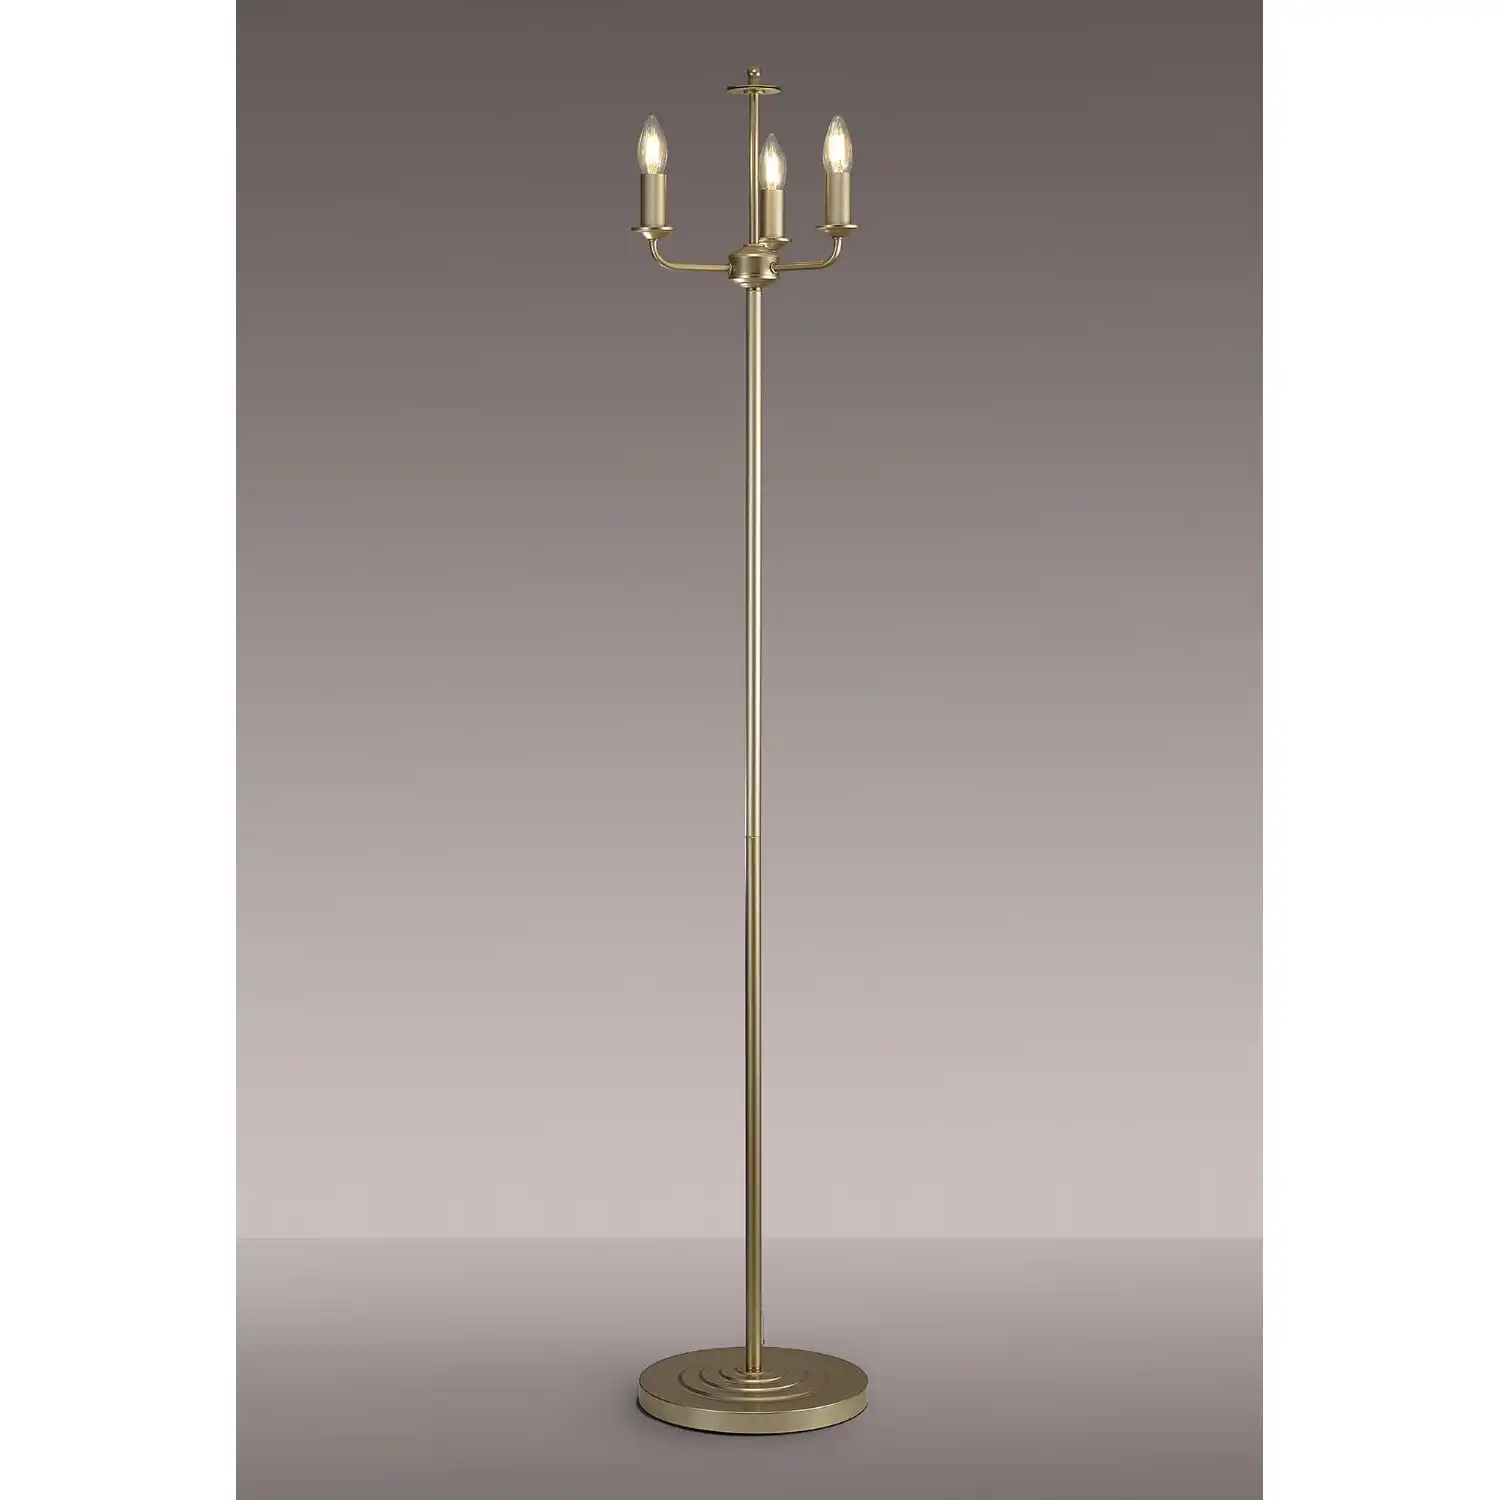 Banyan 3 Light Switched Floor Lamp Without Shade, E14 Painted Champagne Gold